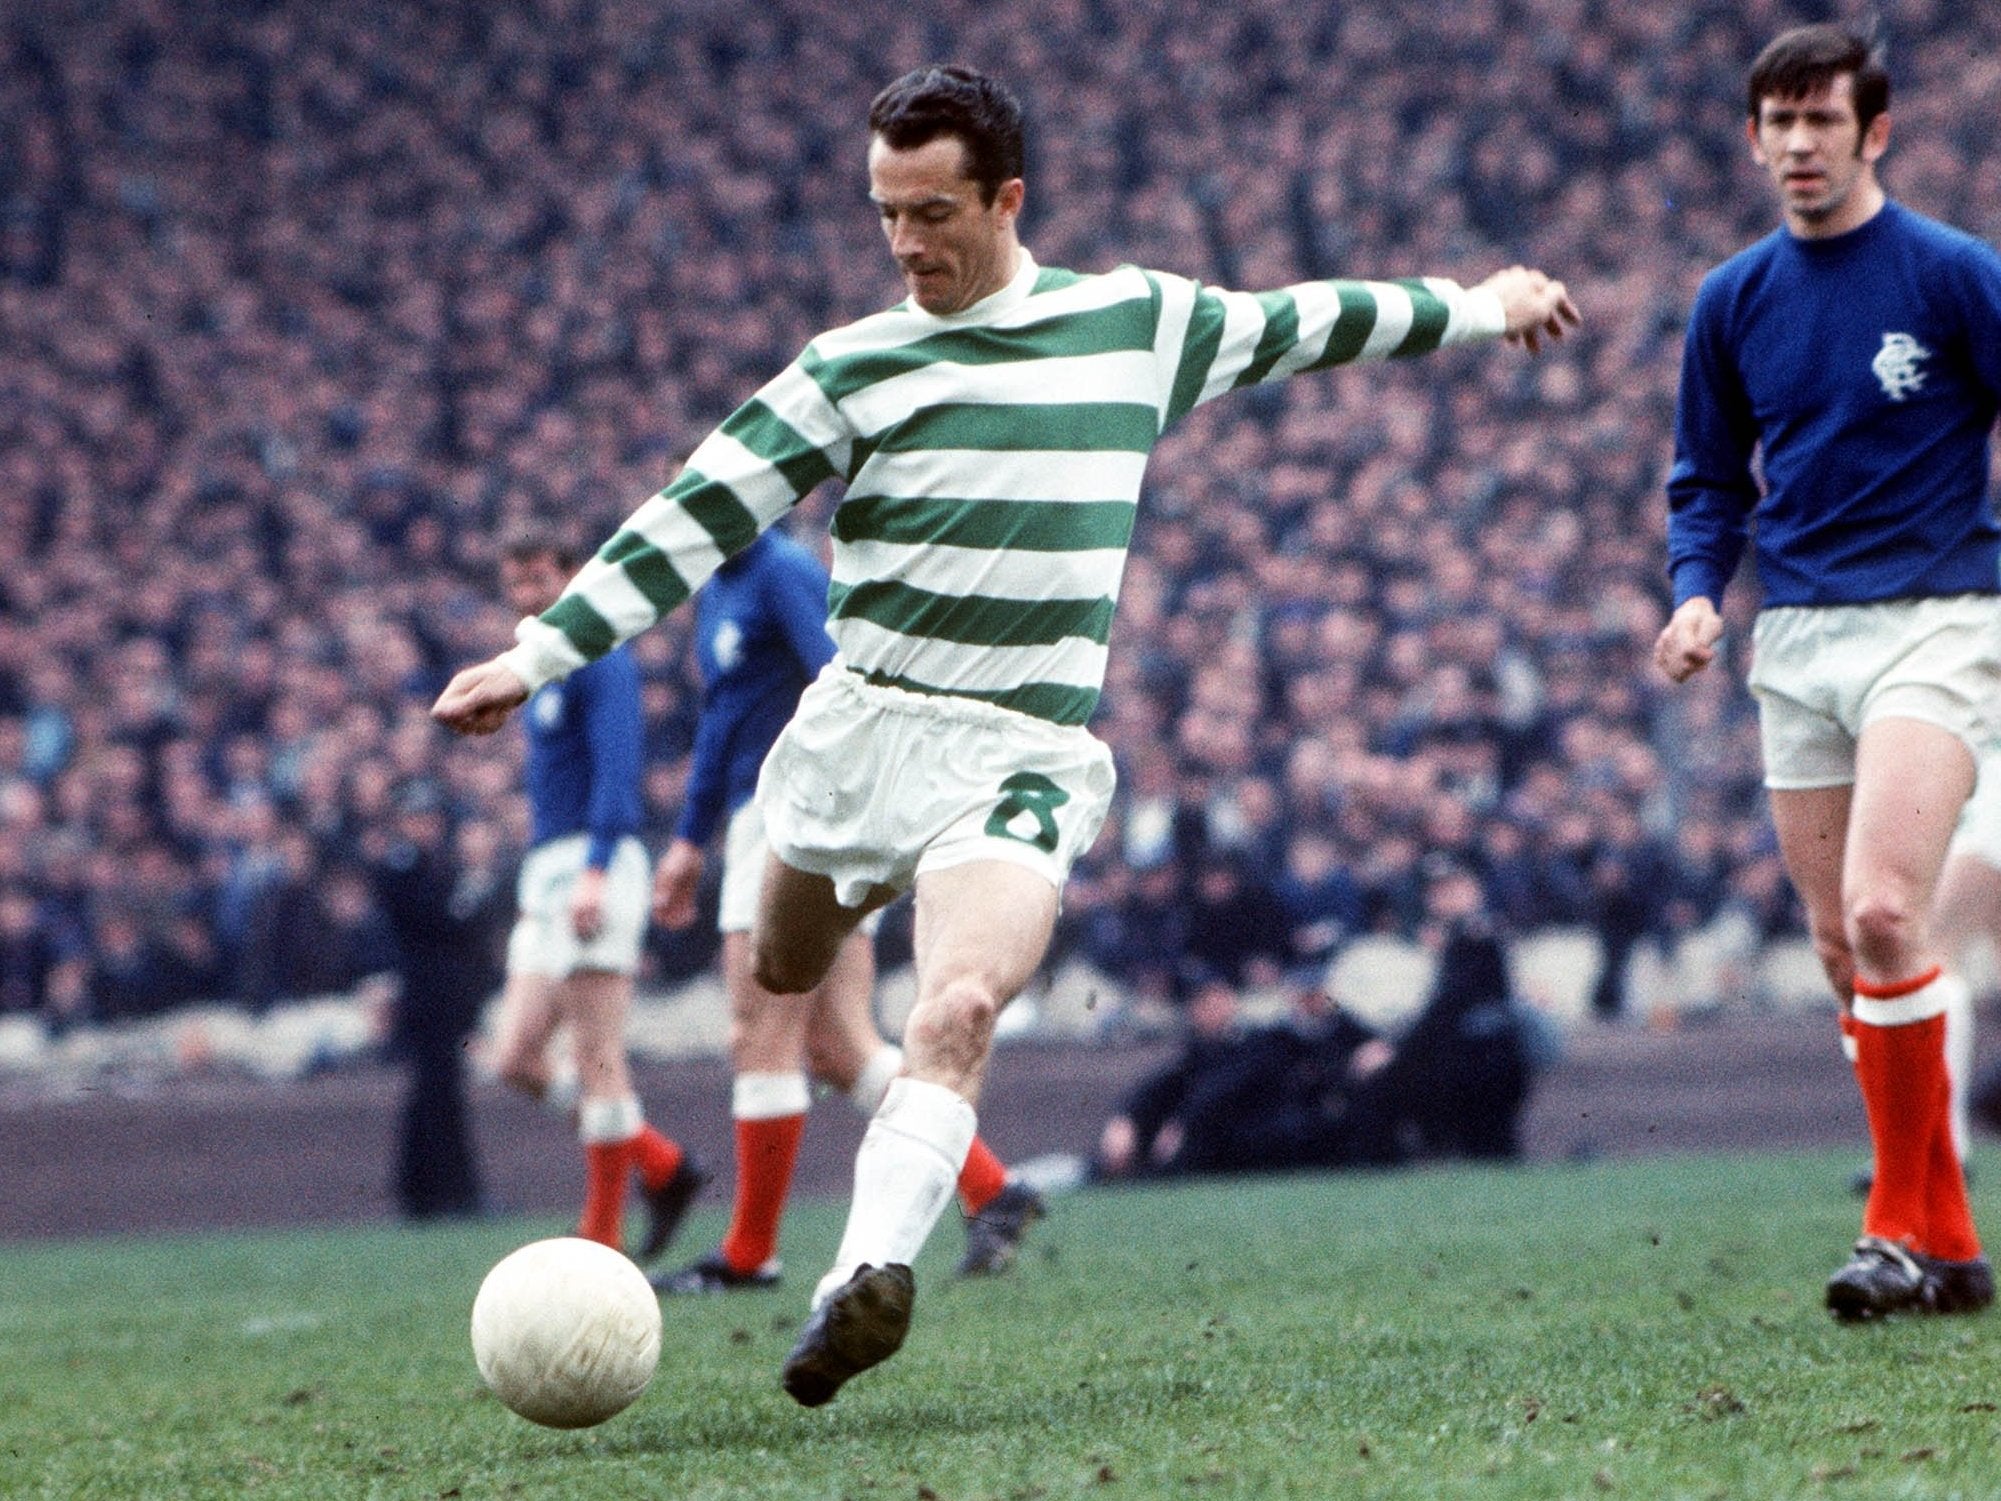 Chalmers in action against Rangers (and their captain John Greig, right) in 1969